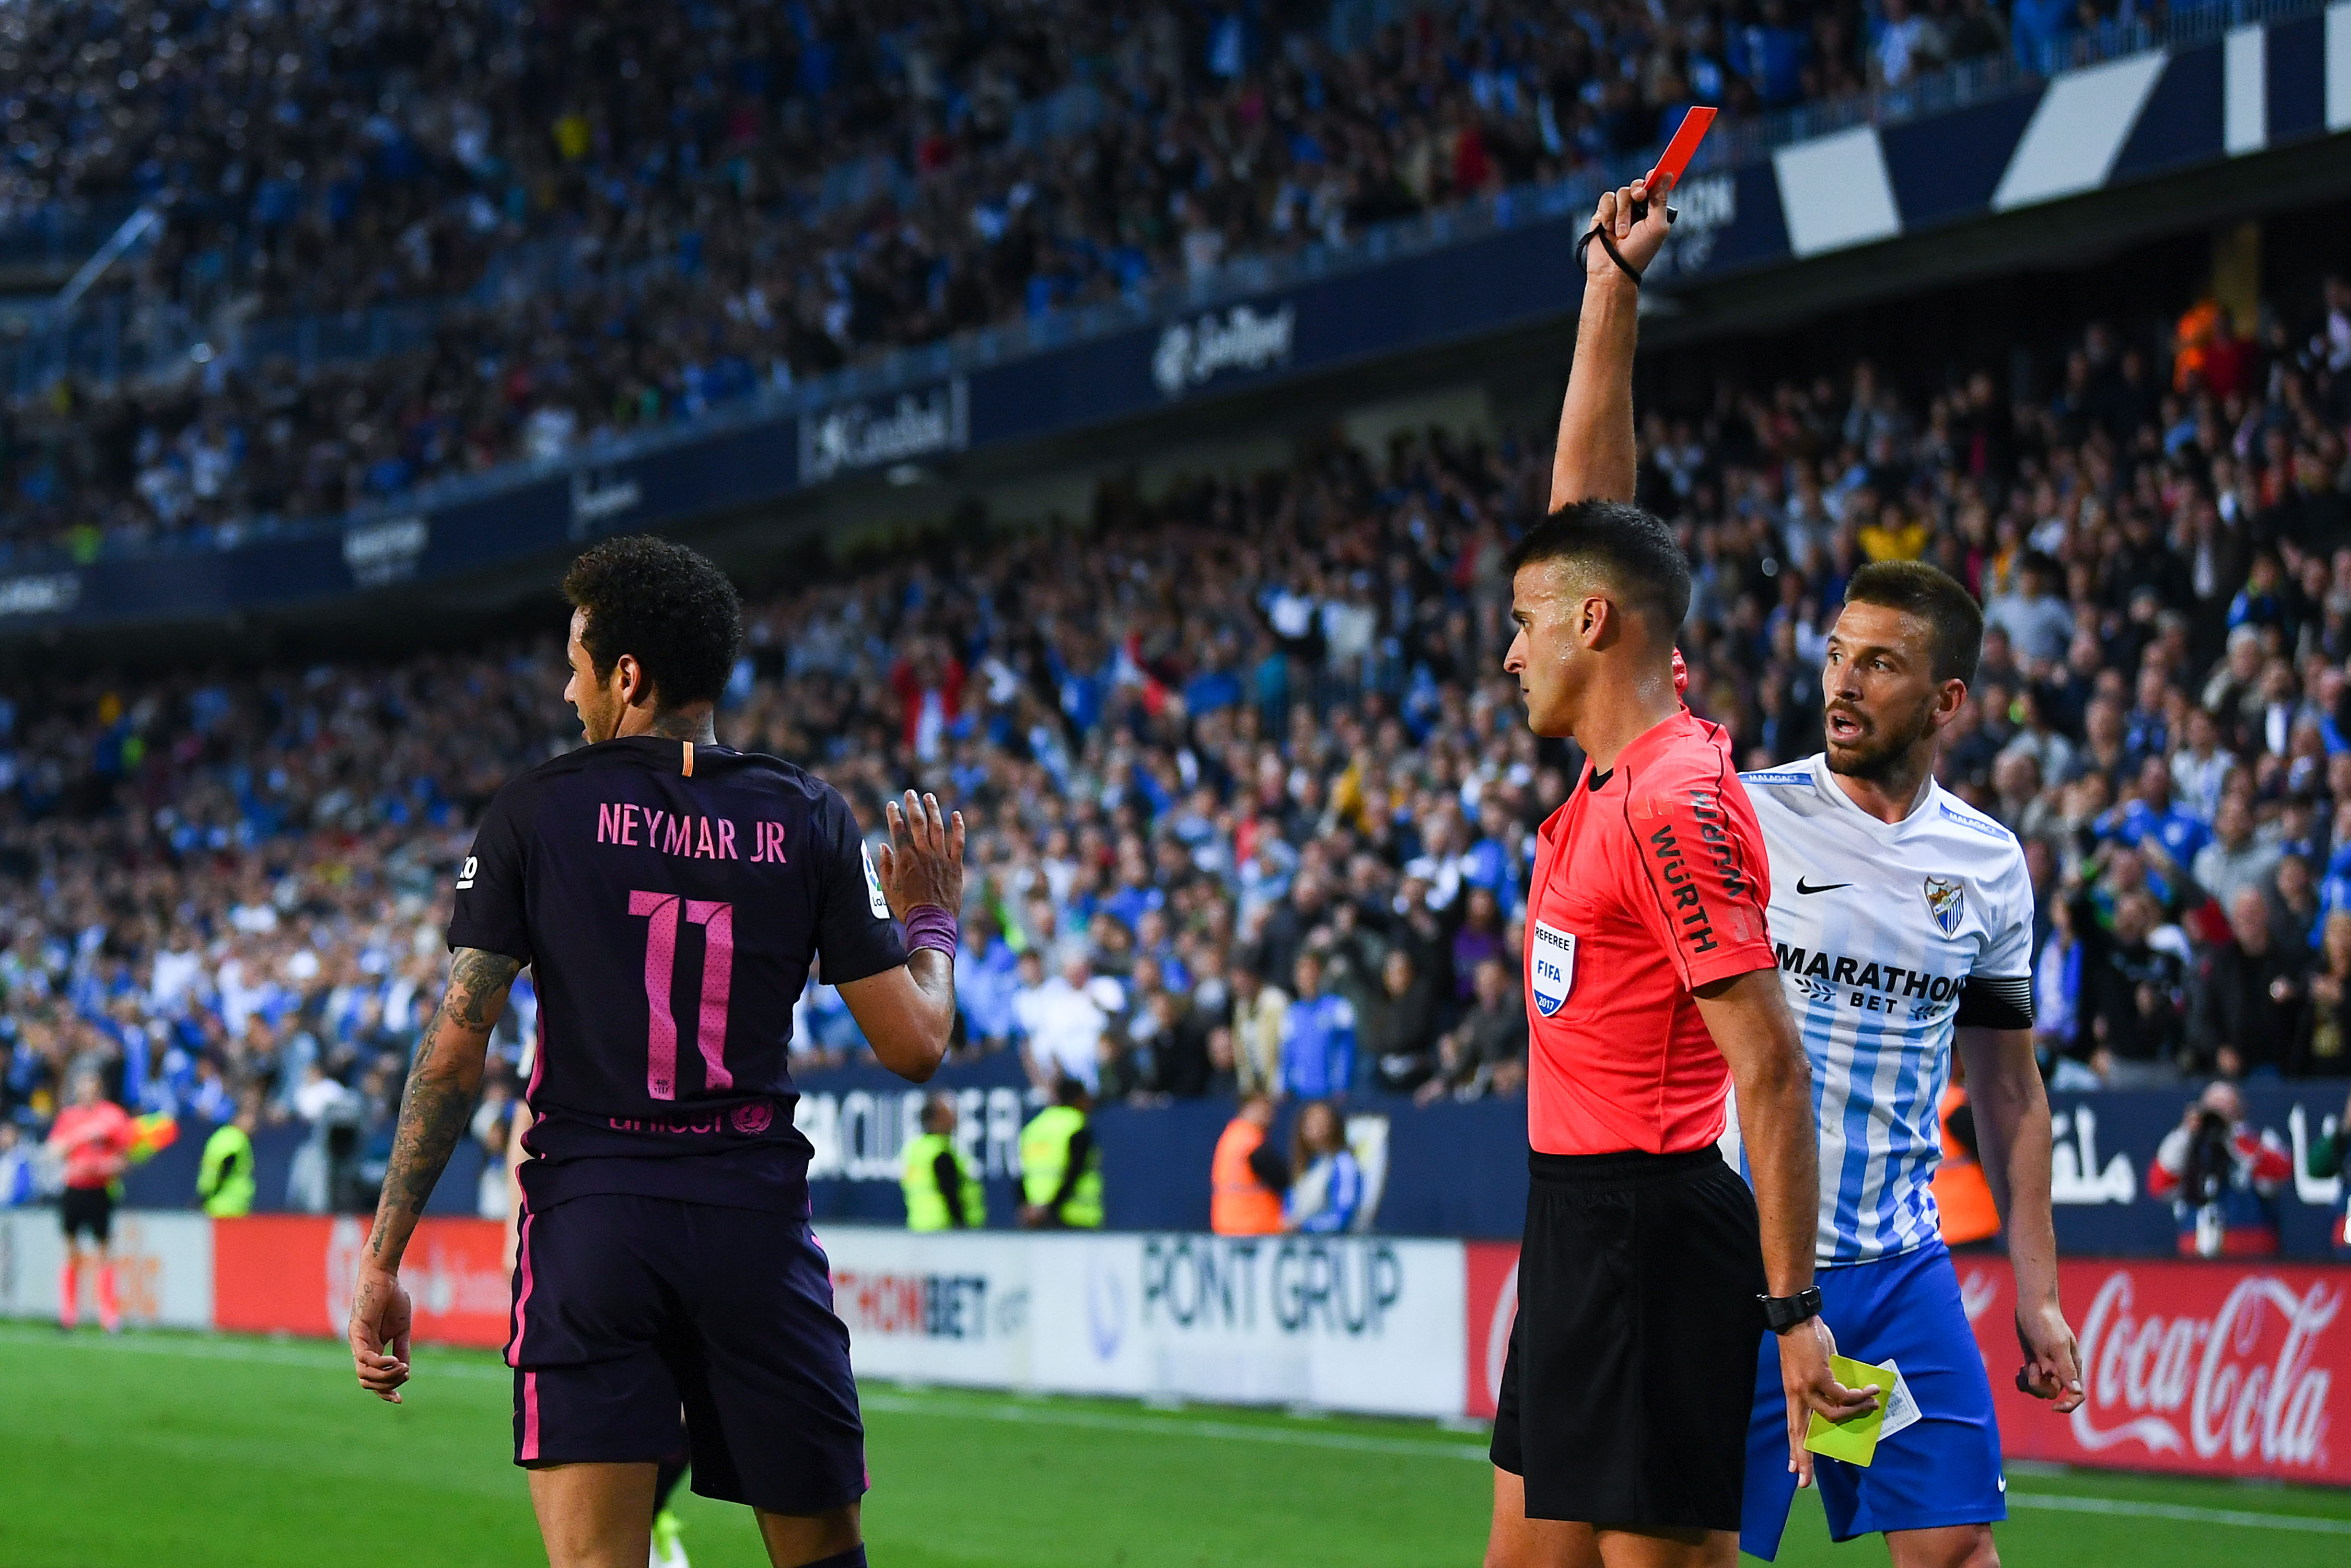 MALAGA, SPAIN - APRIL 08:  Neymar Jr. of FC Barcelona is shown a red card during the La Liga match between Malaga CF and FC Barcelona at La Rosaleda stadium on April 8, 2017 in Malaga, Spain.  (Photo by David Ramos/Getty Images)